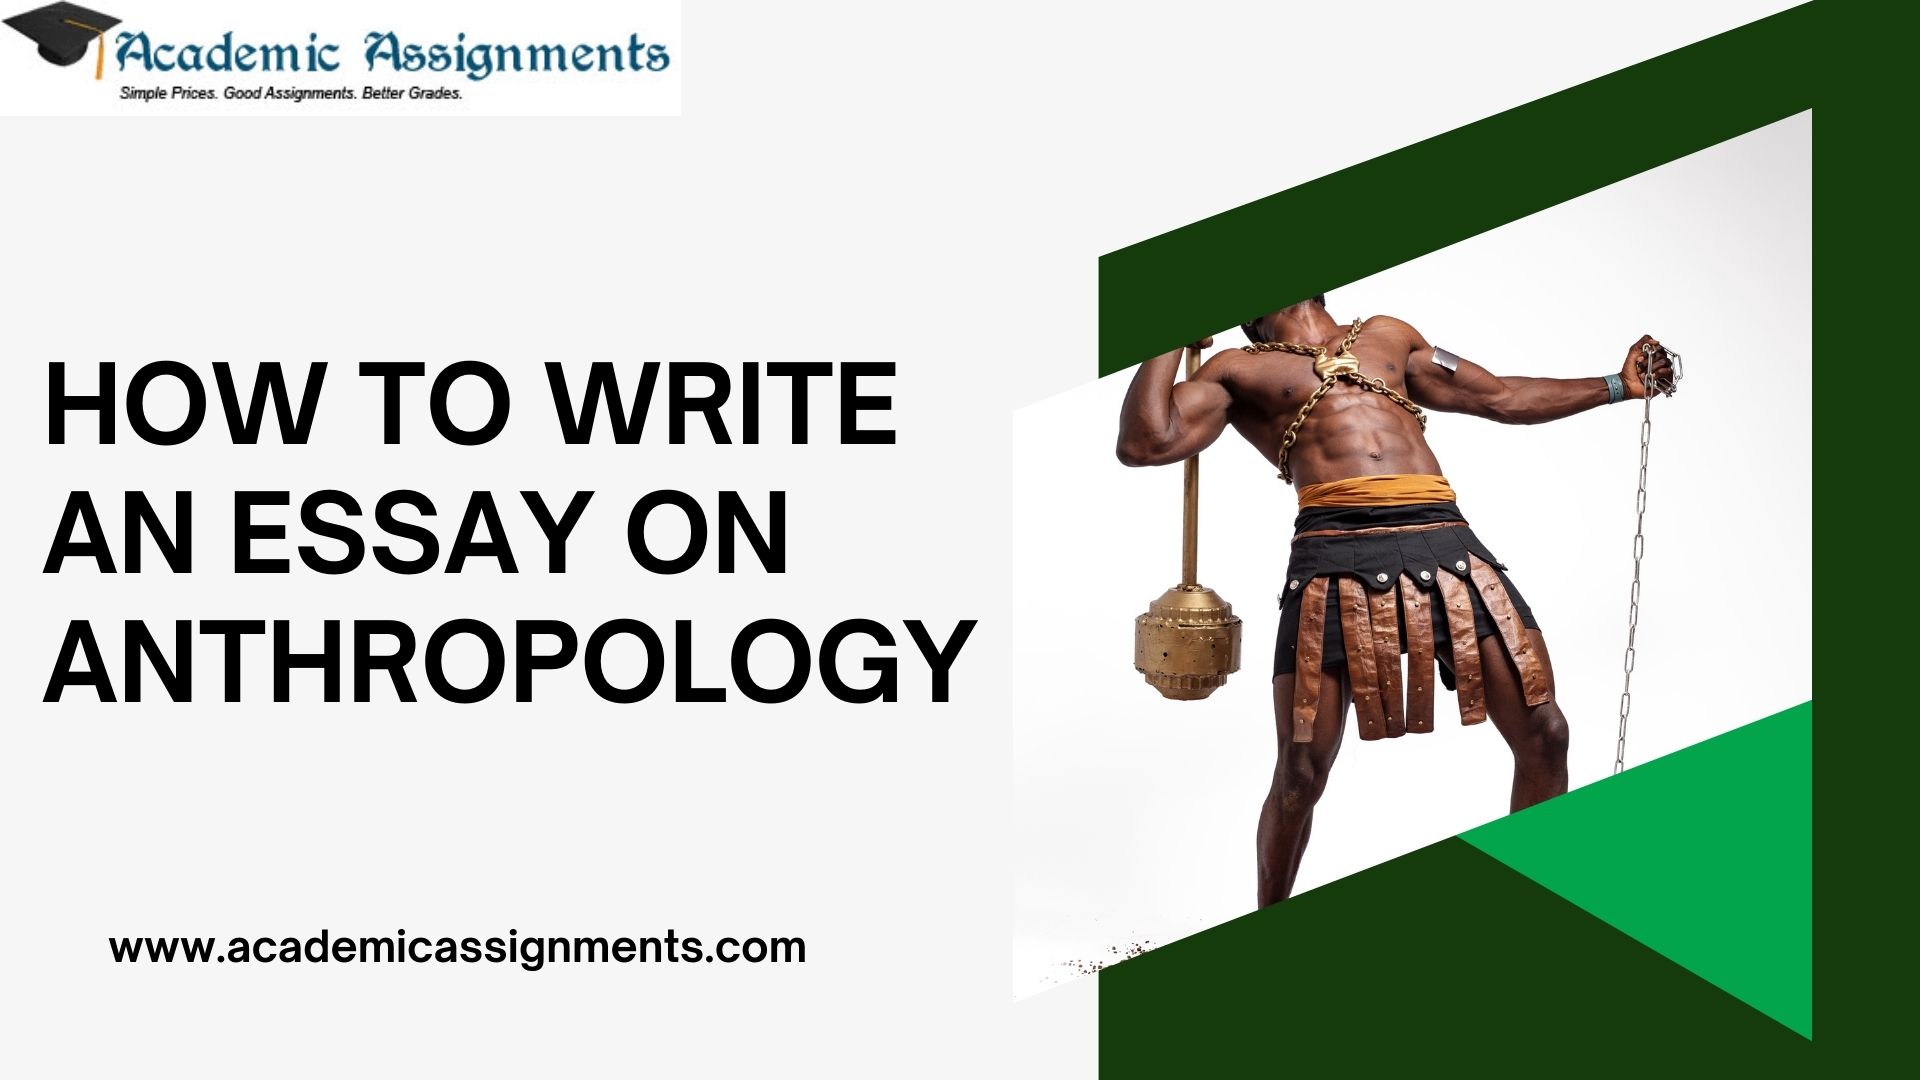 HOW TO WRITE AN ESSAY ON ANTHROPOLOGY